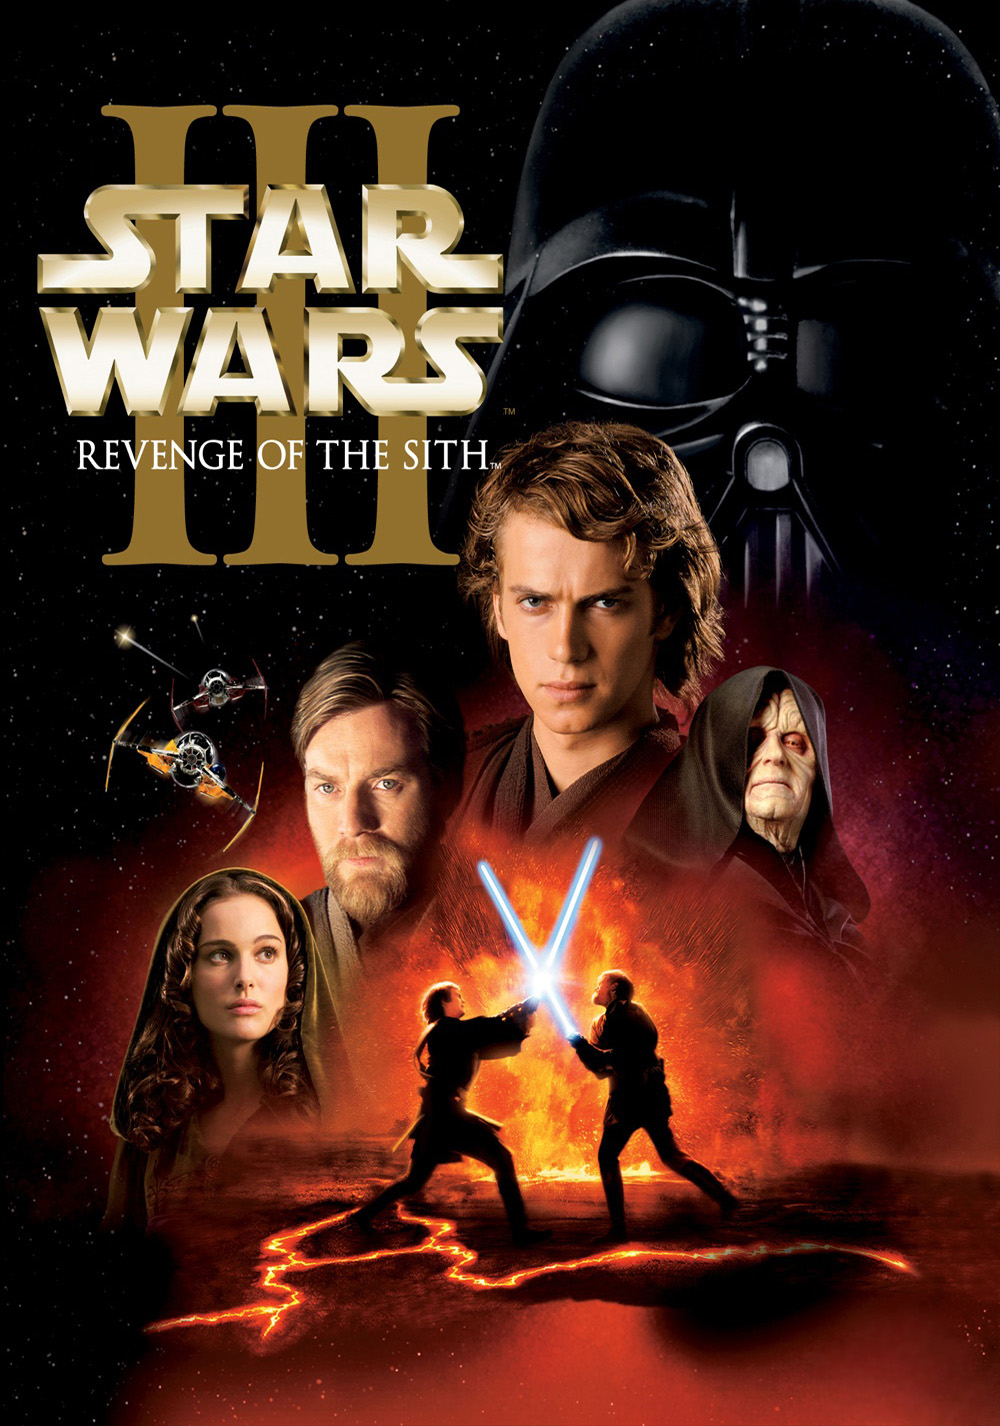 Star Wars Ep. III: Revenge of the Sith for ios download